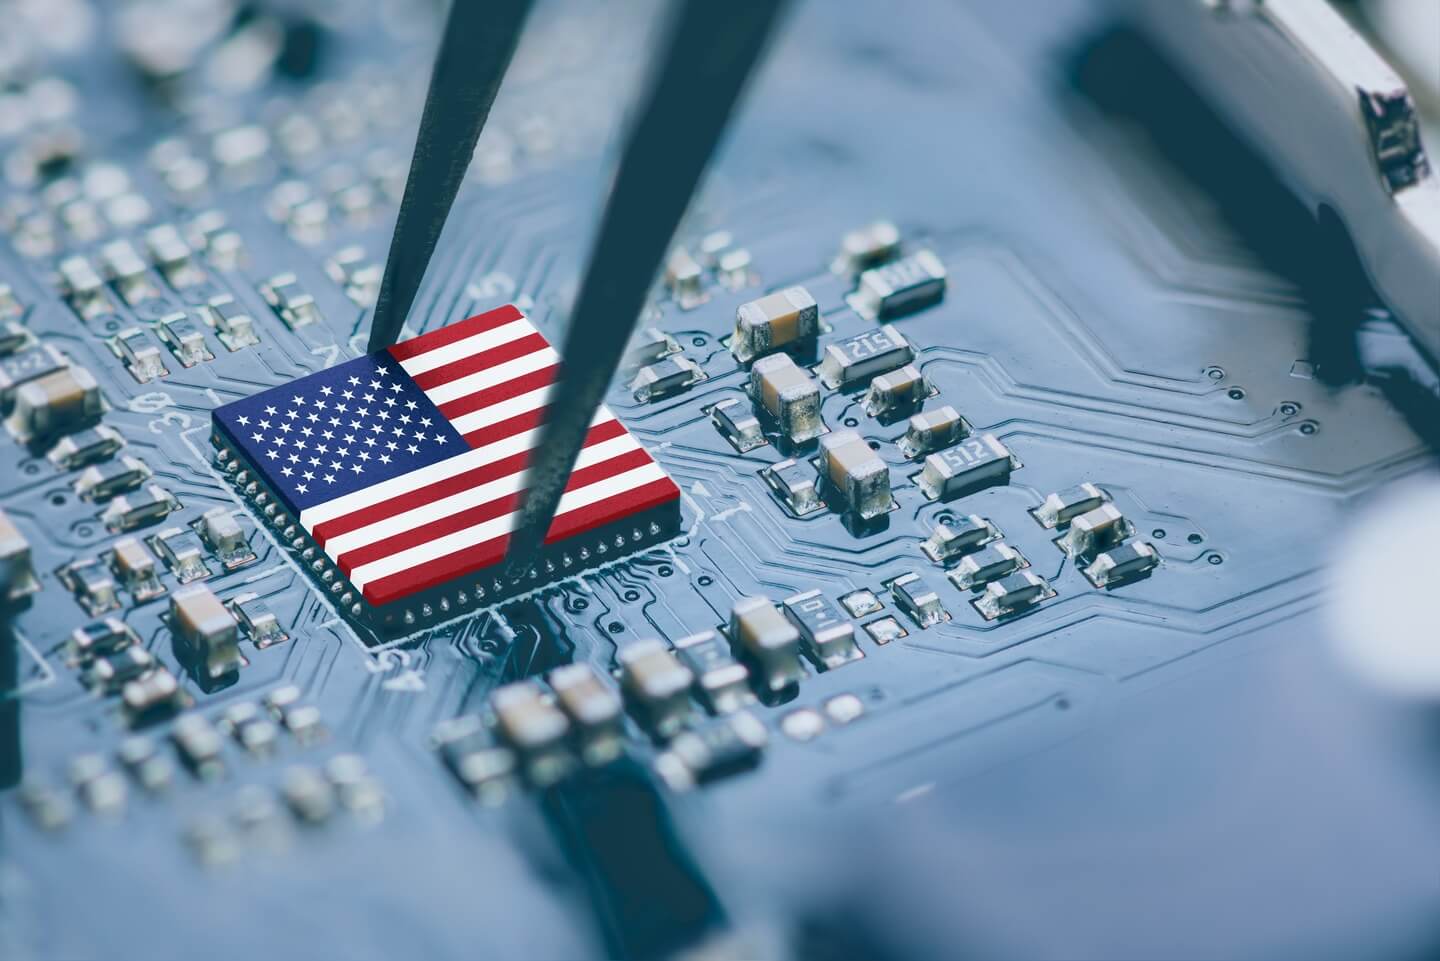 The hefty price Lam Research, other US chip equipment makers is paying due to the export ban